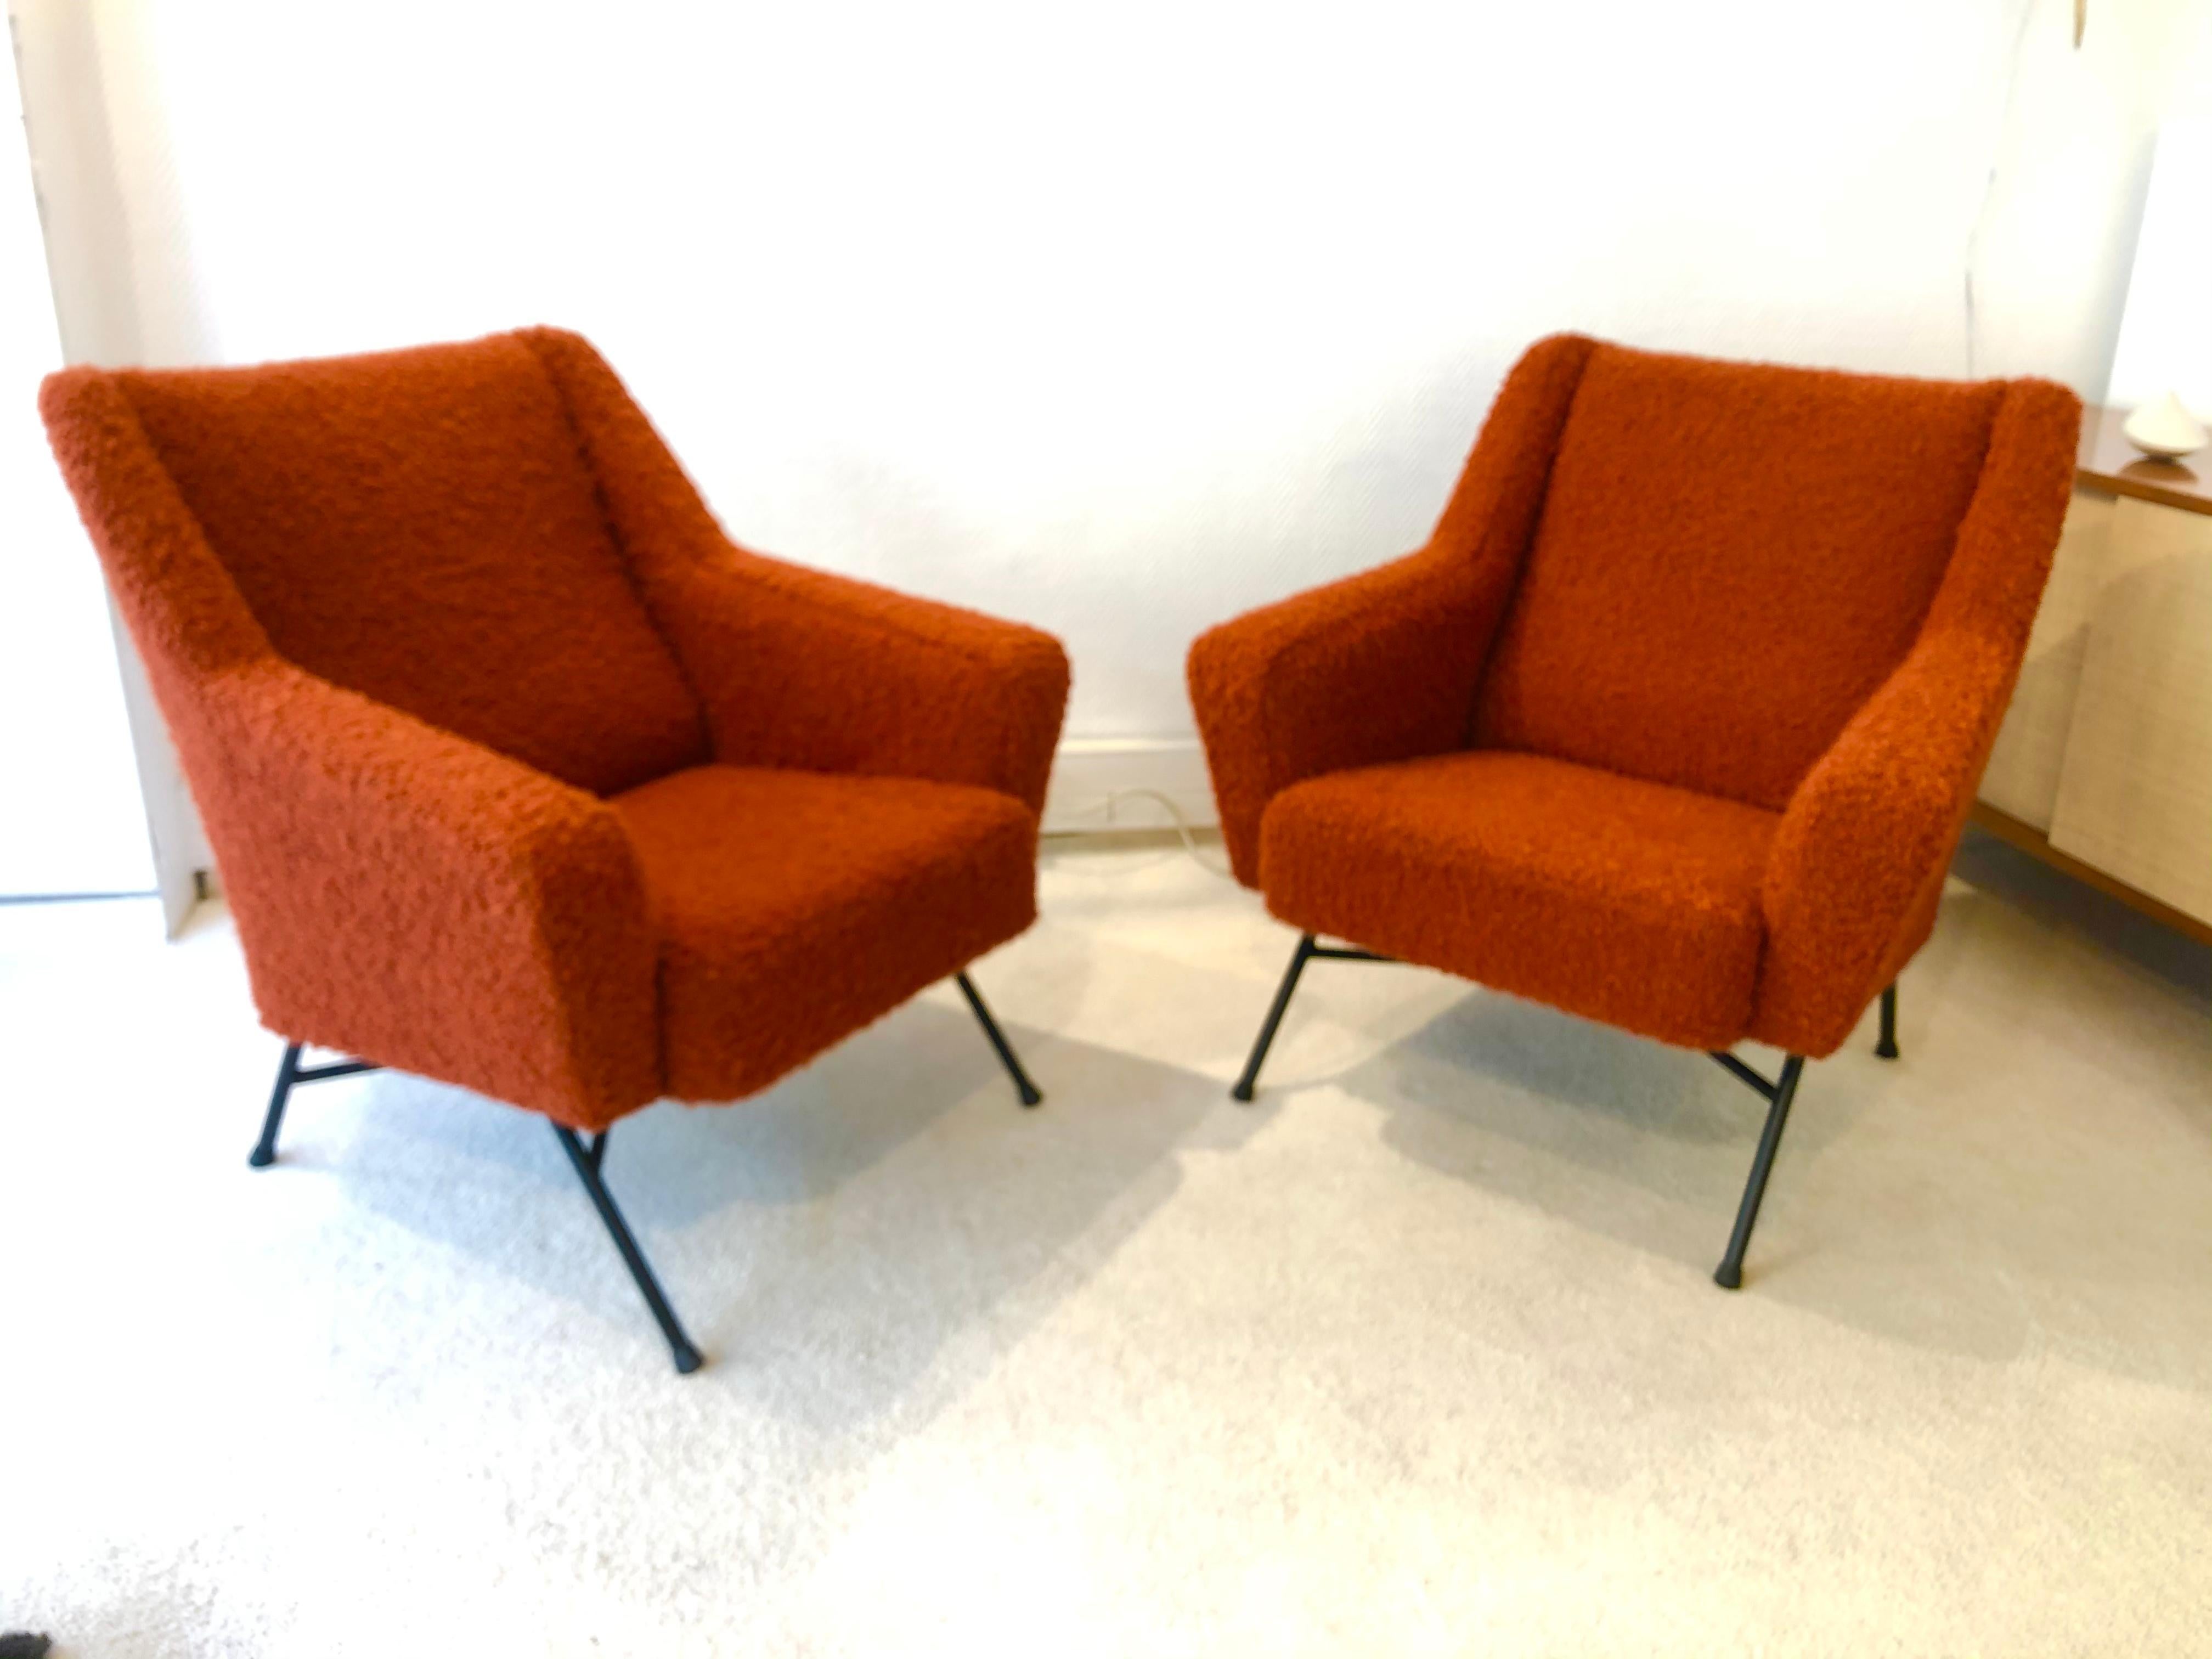 Pair of armchairs by Dangles et Defrance
from 1950 edited by the burov house
Metal and fabric top of the line
terracotta color.